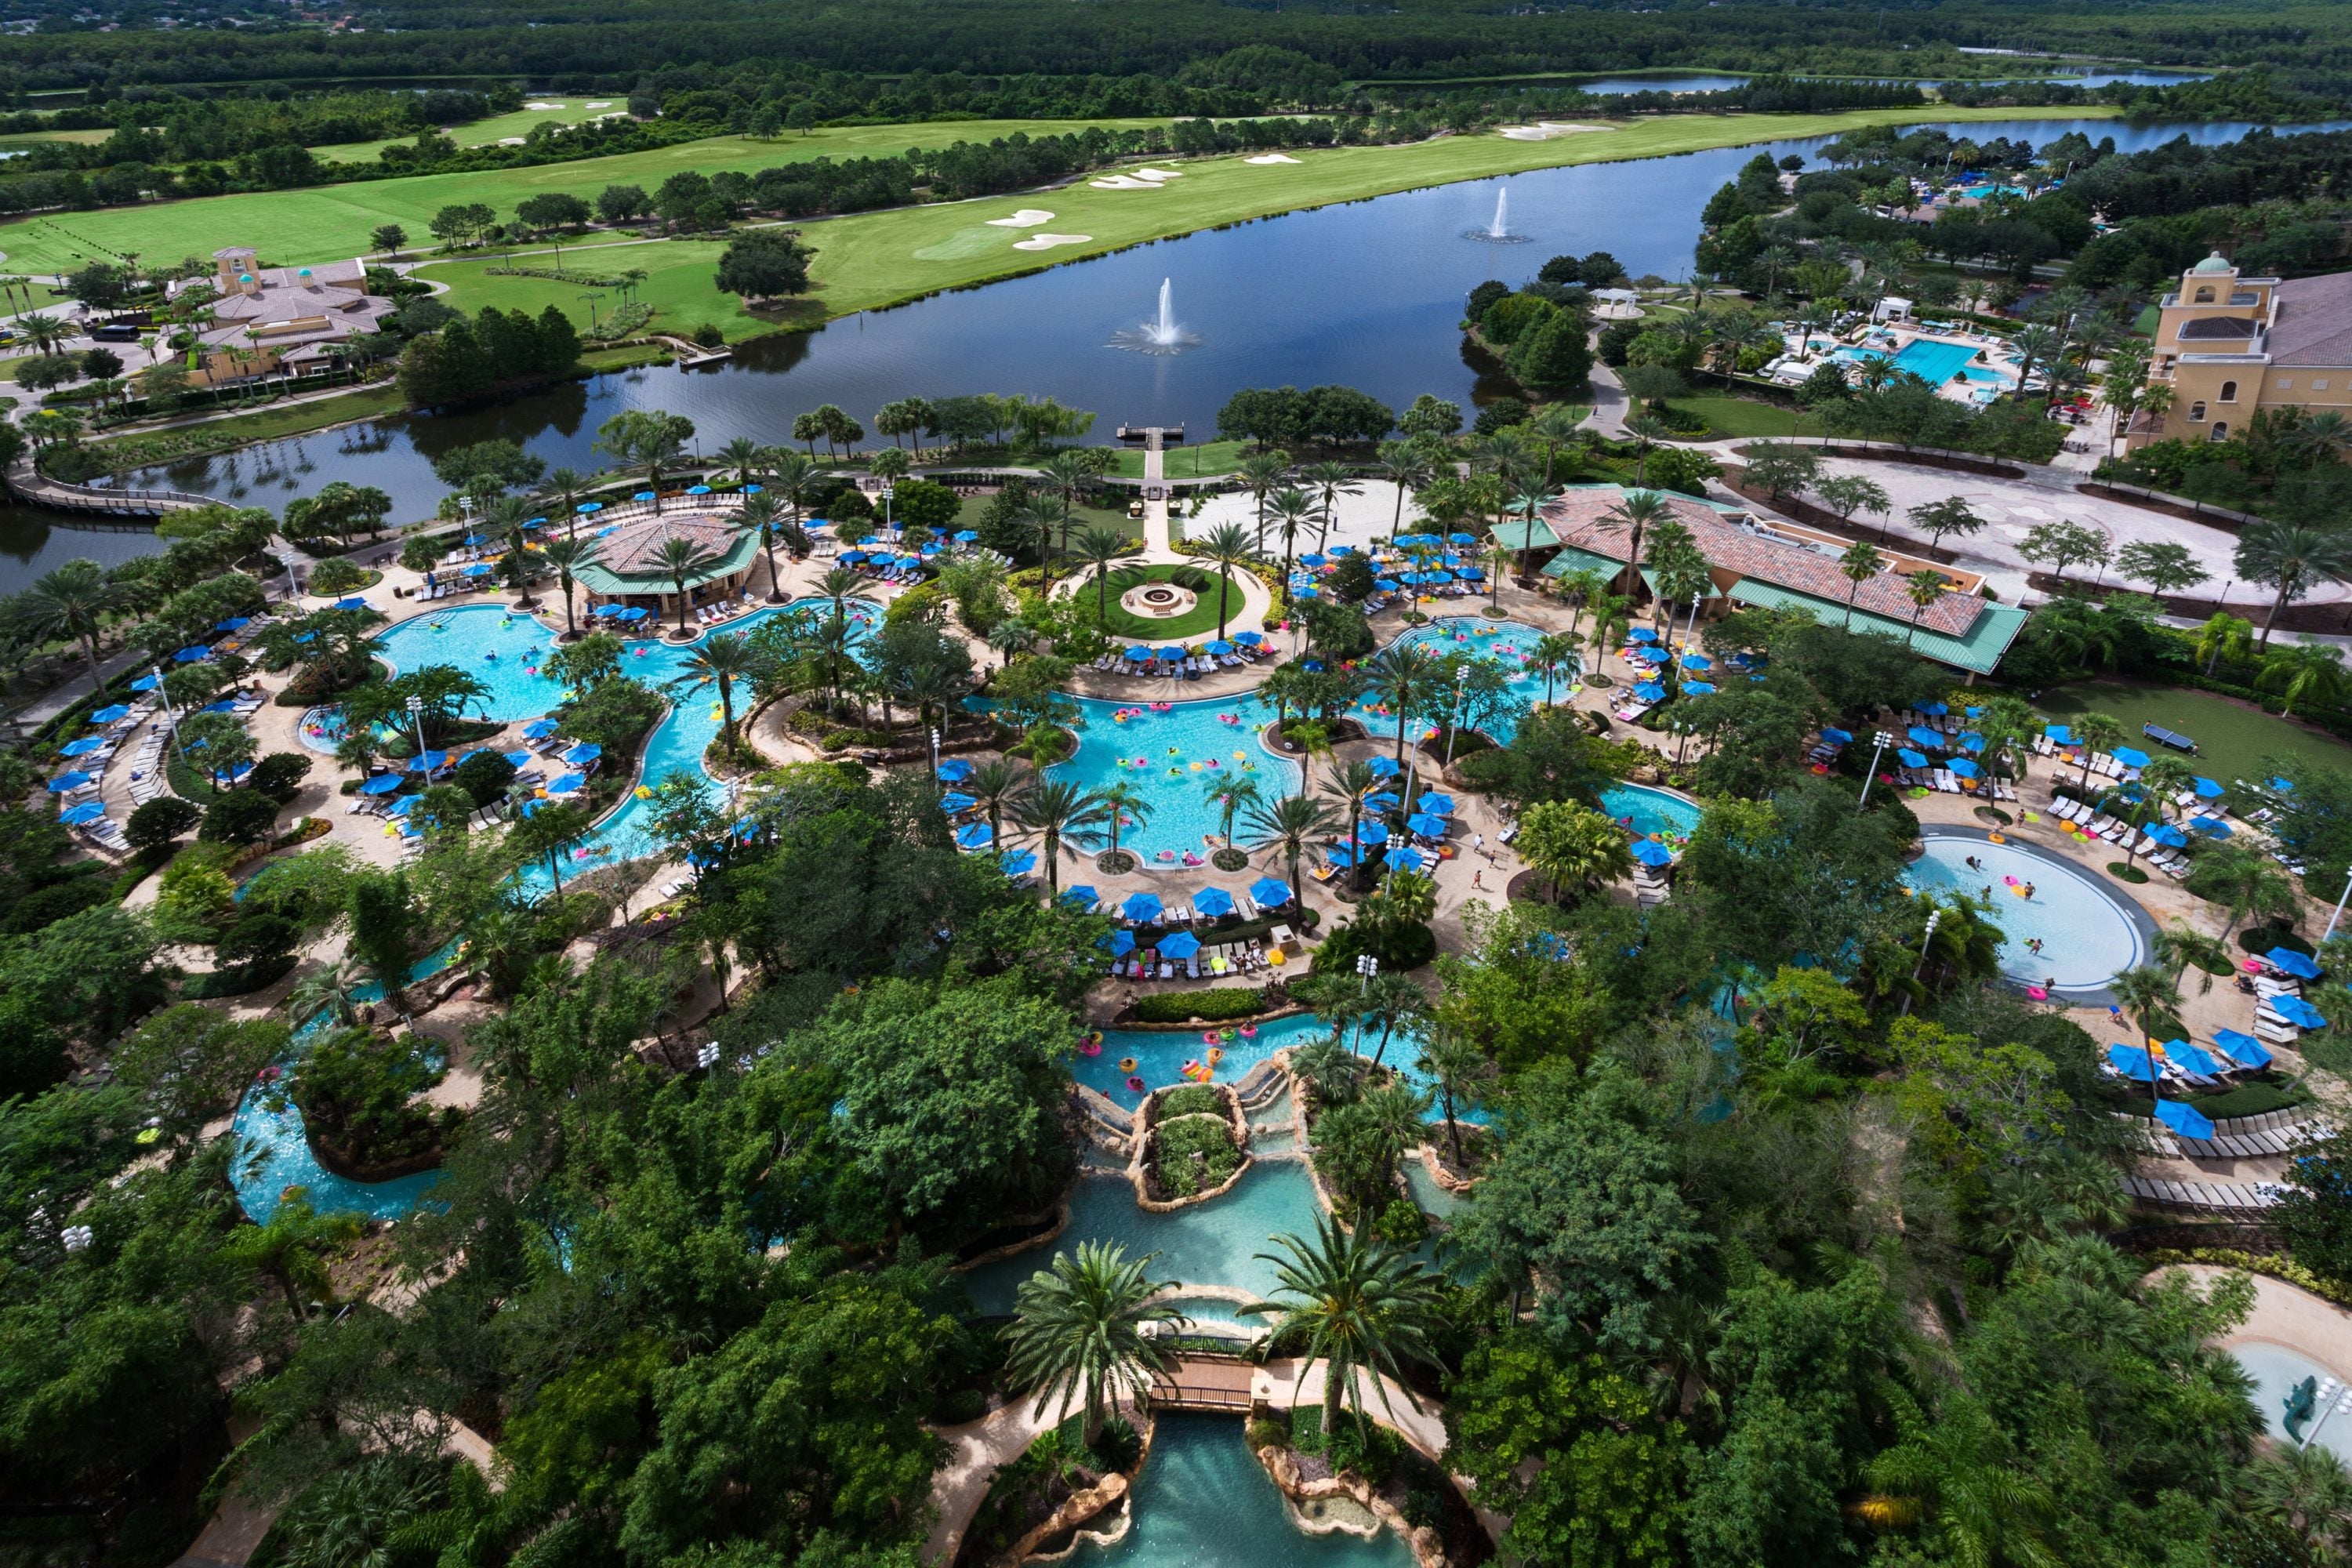 Water Park at the JW Marriott Orlando